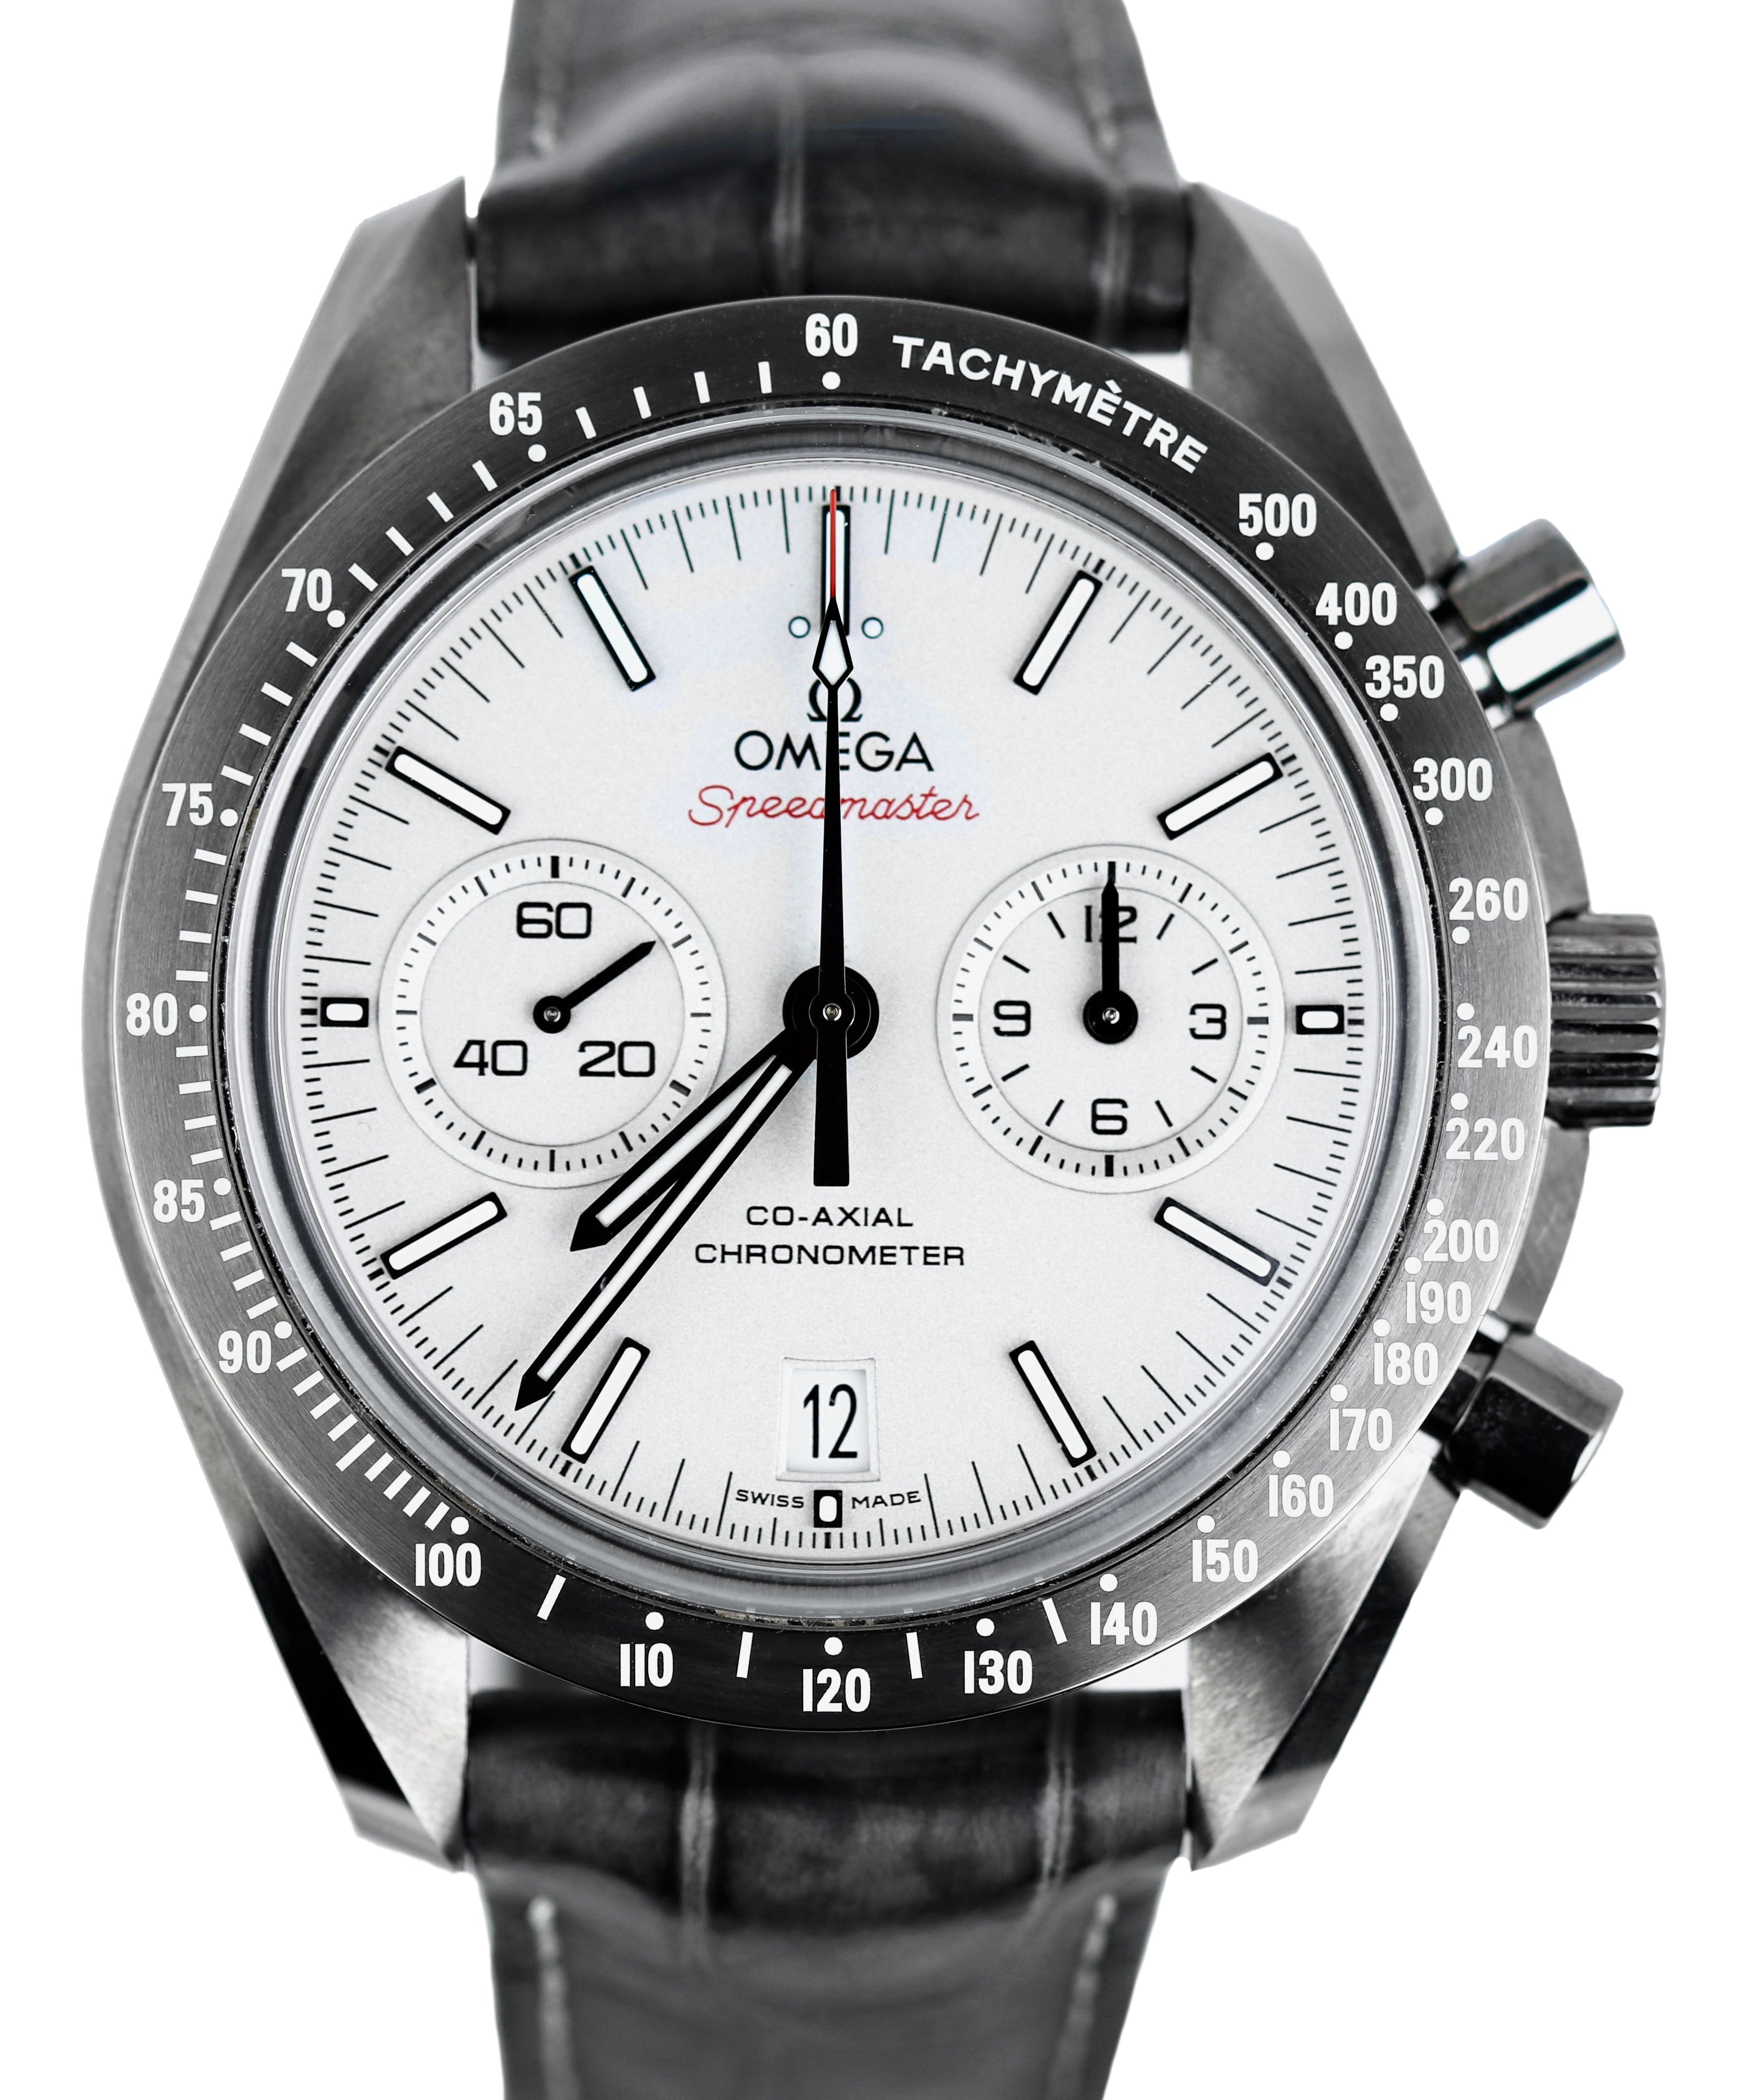 Omega Speedmaster Grey Side of the Moon 311.93.44.51.99.001 Moonwatch Co-Axial